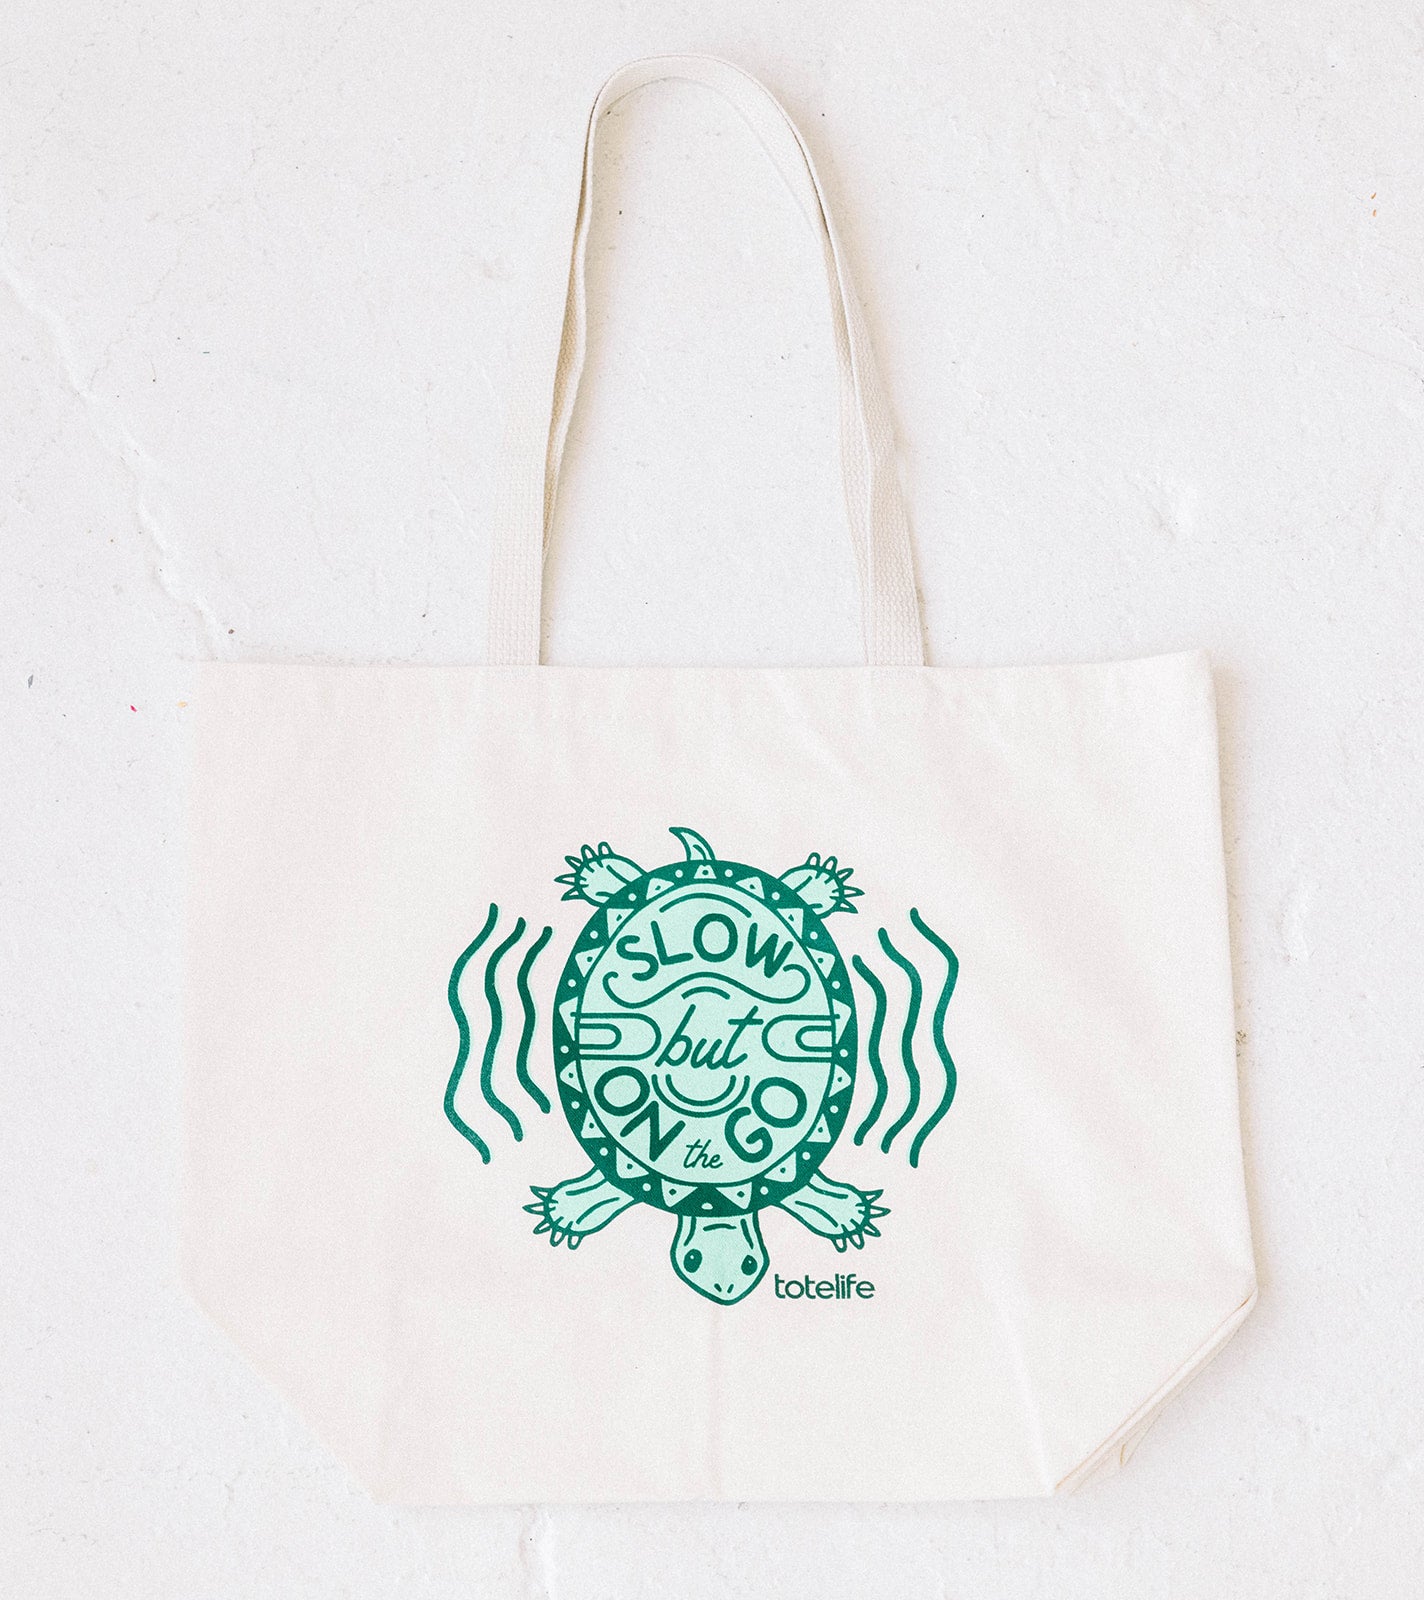 Slow but on the Go Tote